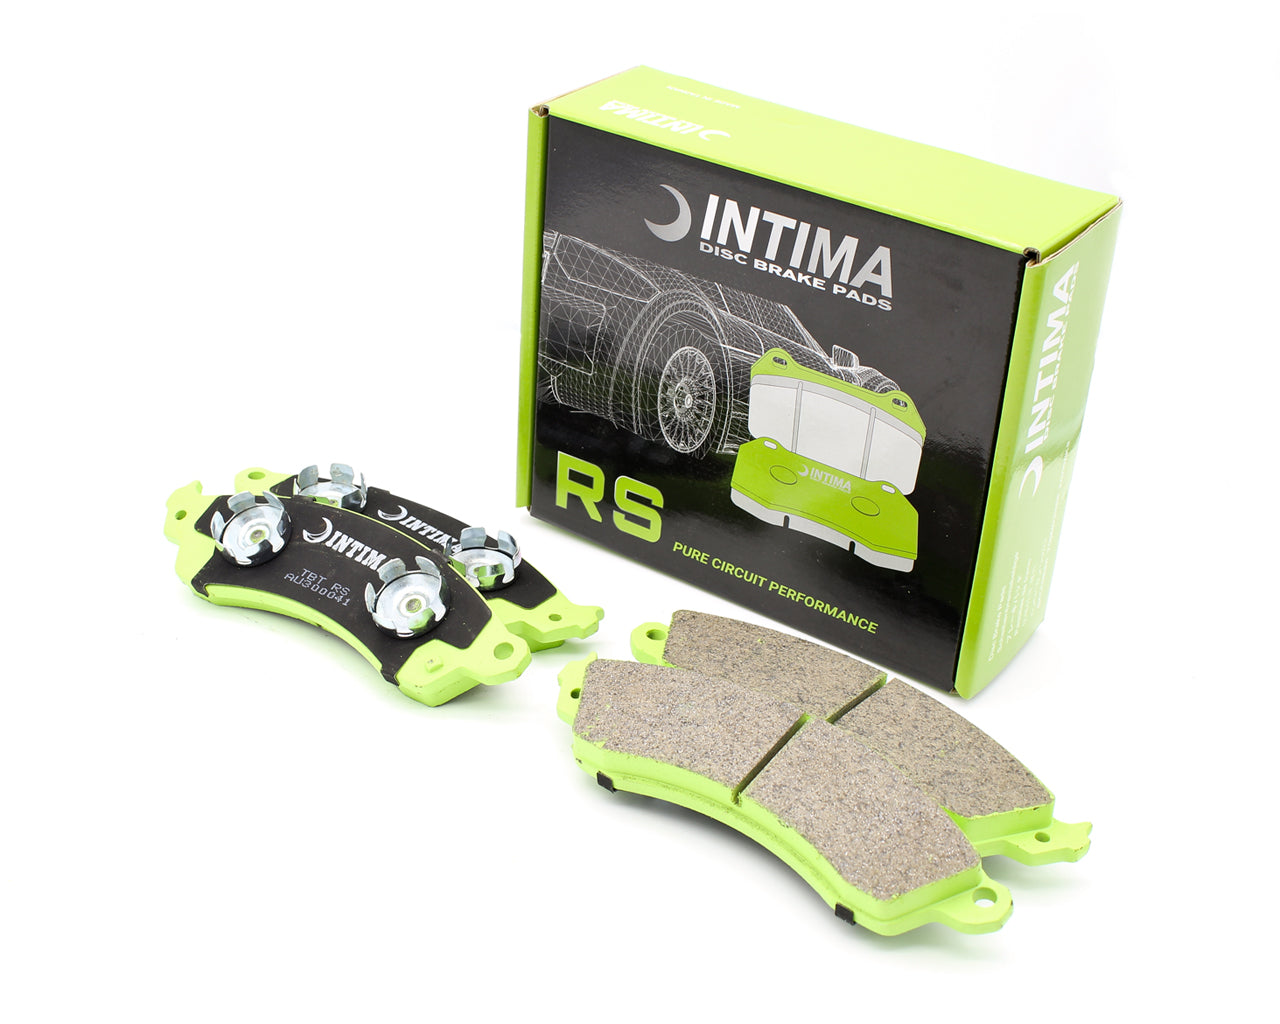 Intima RS Front Brake pads - Corvette C4, Saloon car, Commodore, Falcon Intima RS Front IN1353 - Racing Solutions